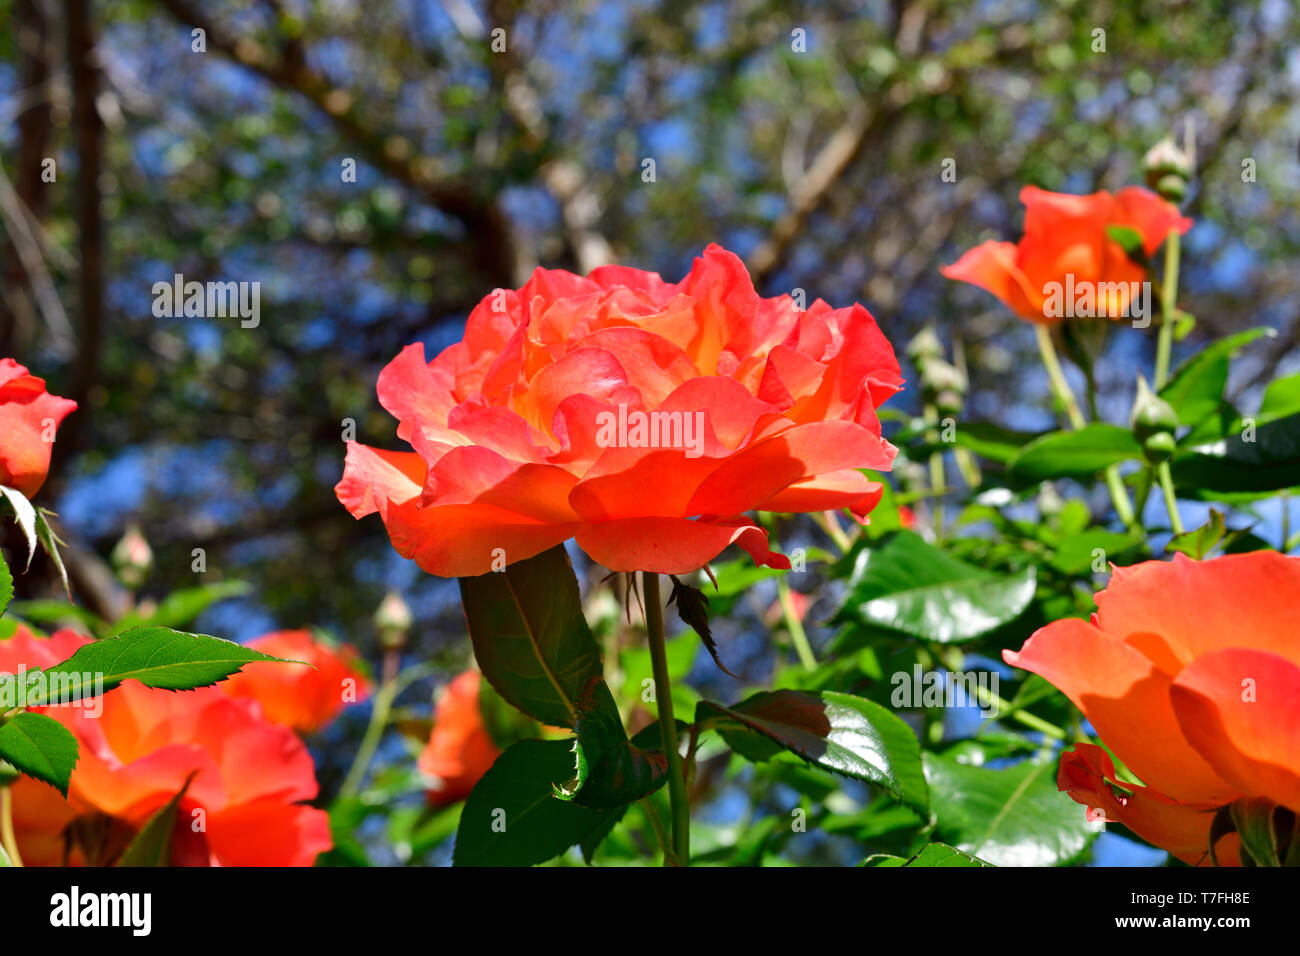 Colorful Spring Roses Stock Photo